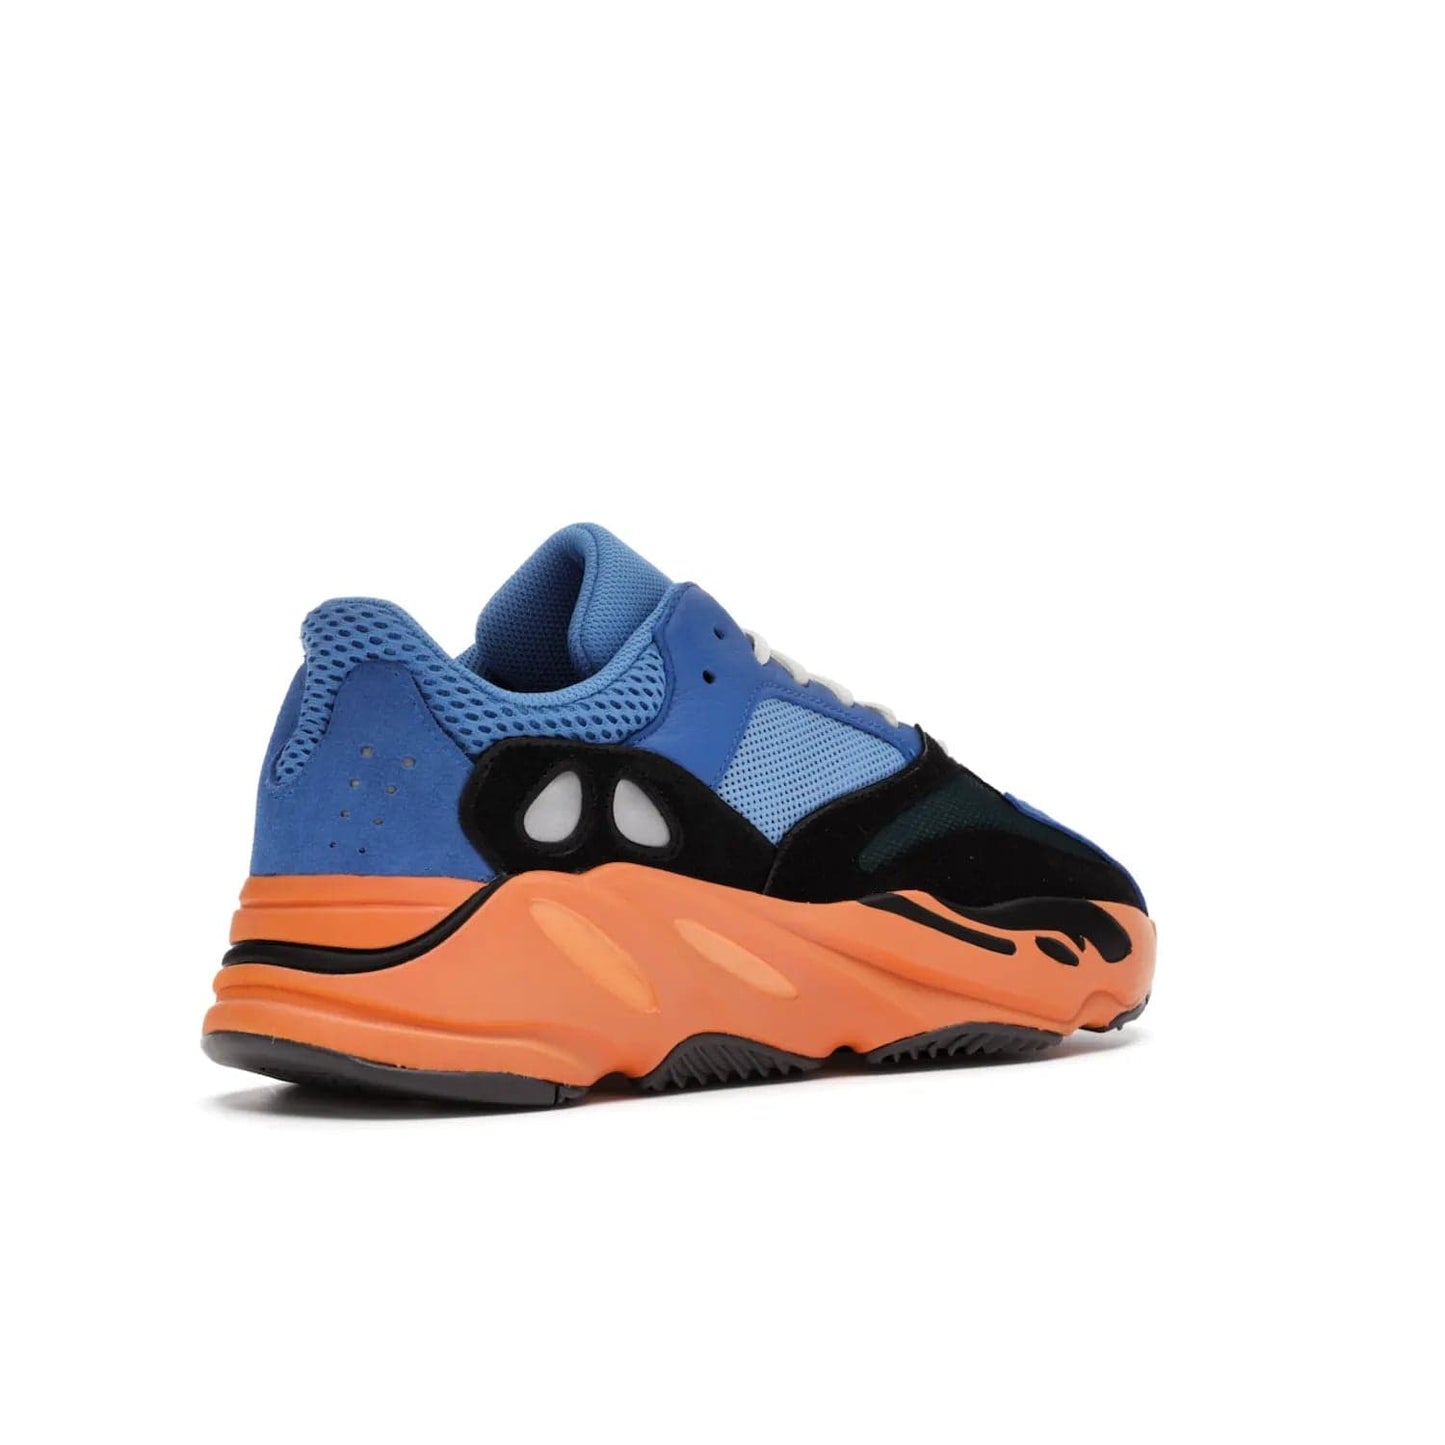 adidas Yeezy Boost 700 Bright Blue - Image 33 - Only at www.BallersClubKickz.com - Iconic sneaker style meets vibrant colour with the adidas Yeezy Boost 700 Bright Blue. Reflective accents, turquoise and teal panels, bright orange midsole and black outsole make for a bold release. April 2021.